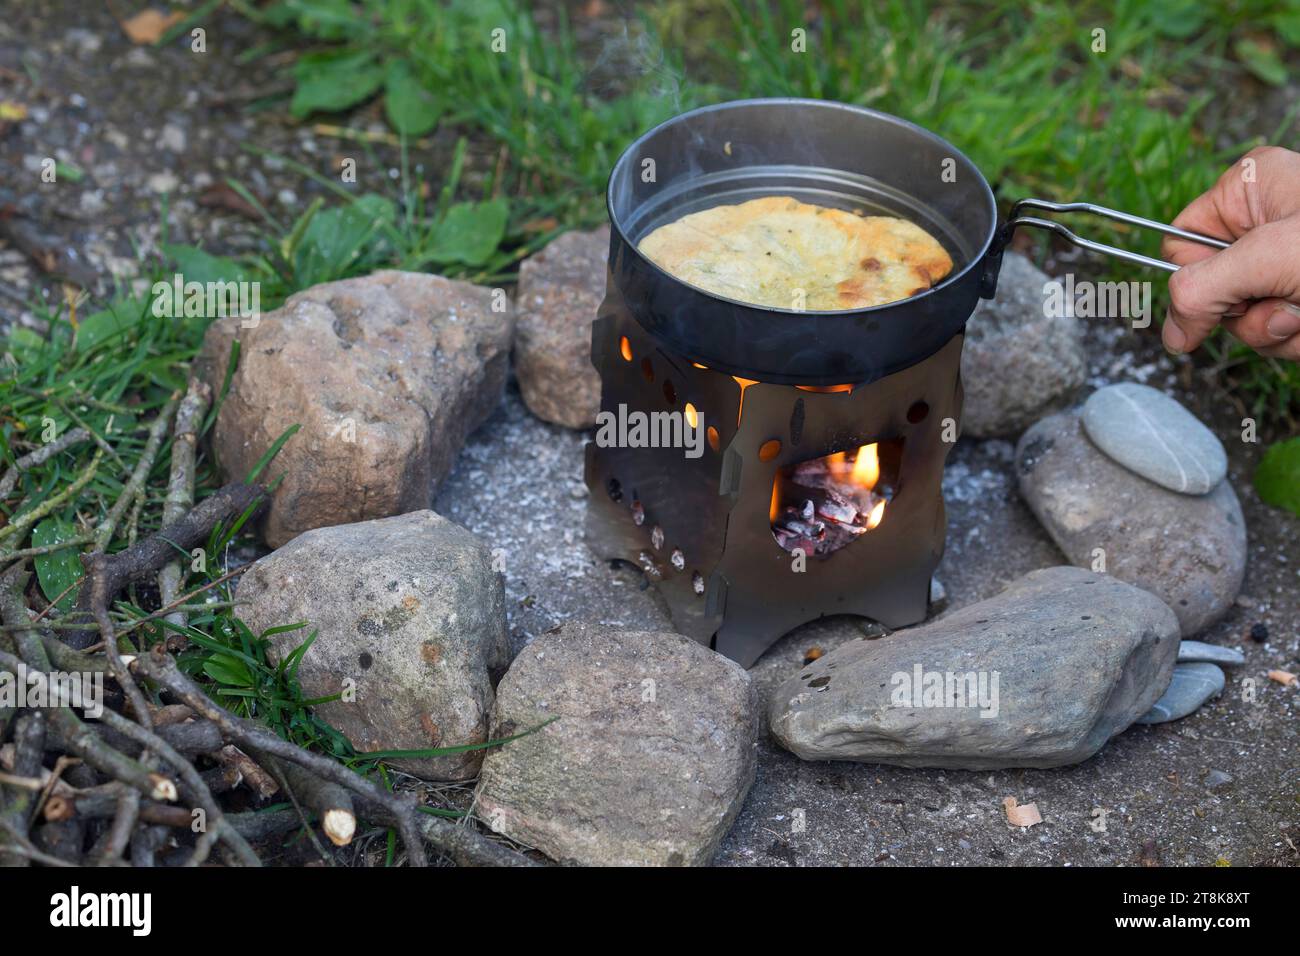 making of bannock, is baked on open fire, bread dough is formed and baken in a pan on a camp cooker, series picture 5/5 Stock Photo